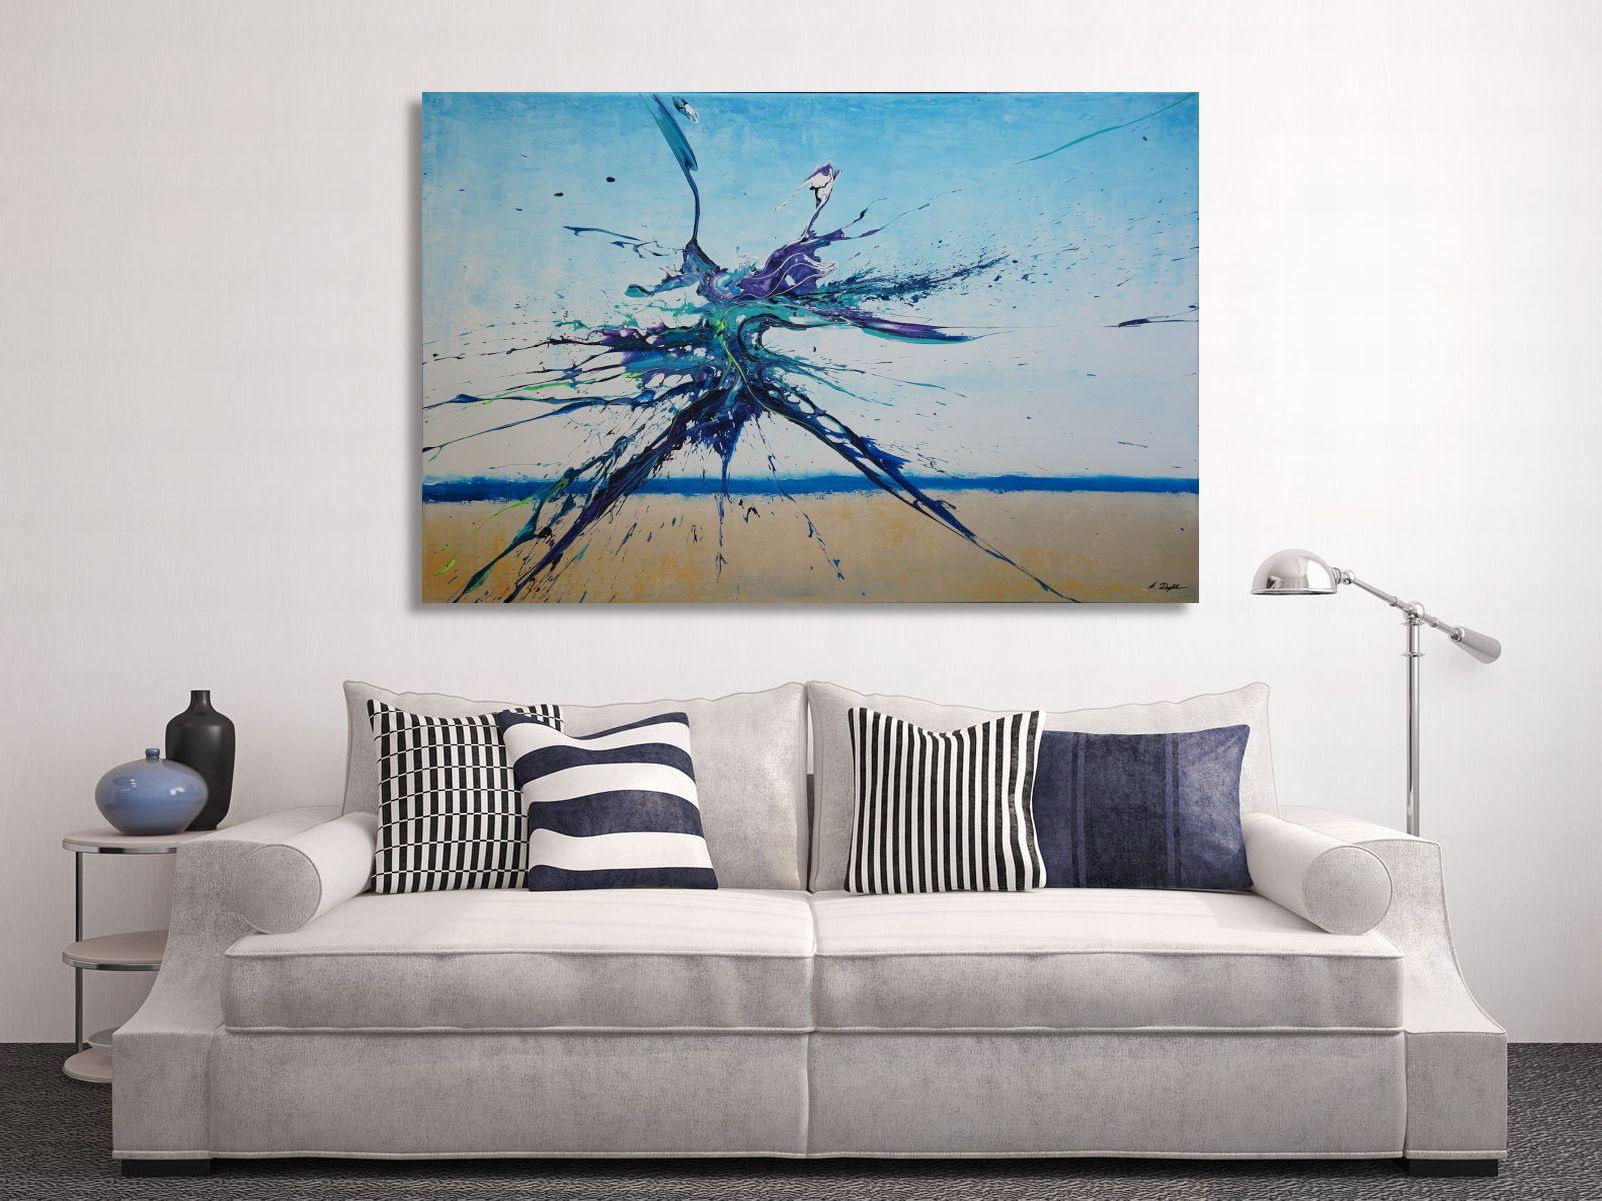 Artist's Beach IV (Spirits Of Skies 096131), Painting, Acrylic on Canvas - Blue Abstract Painting by Ansgar Dressler